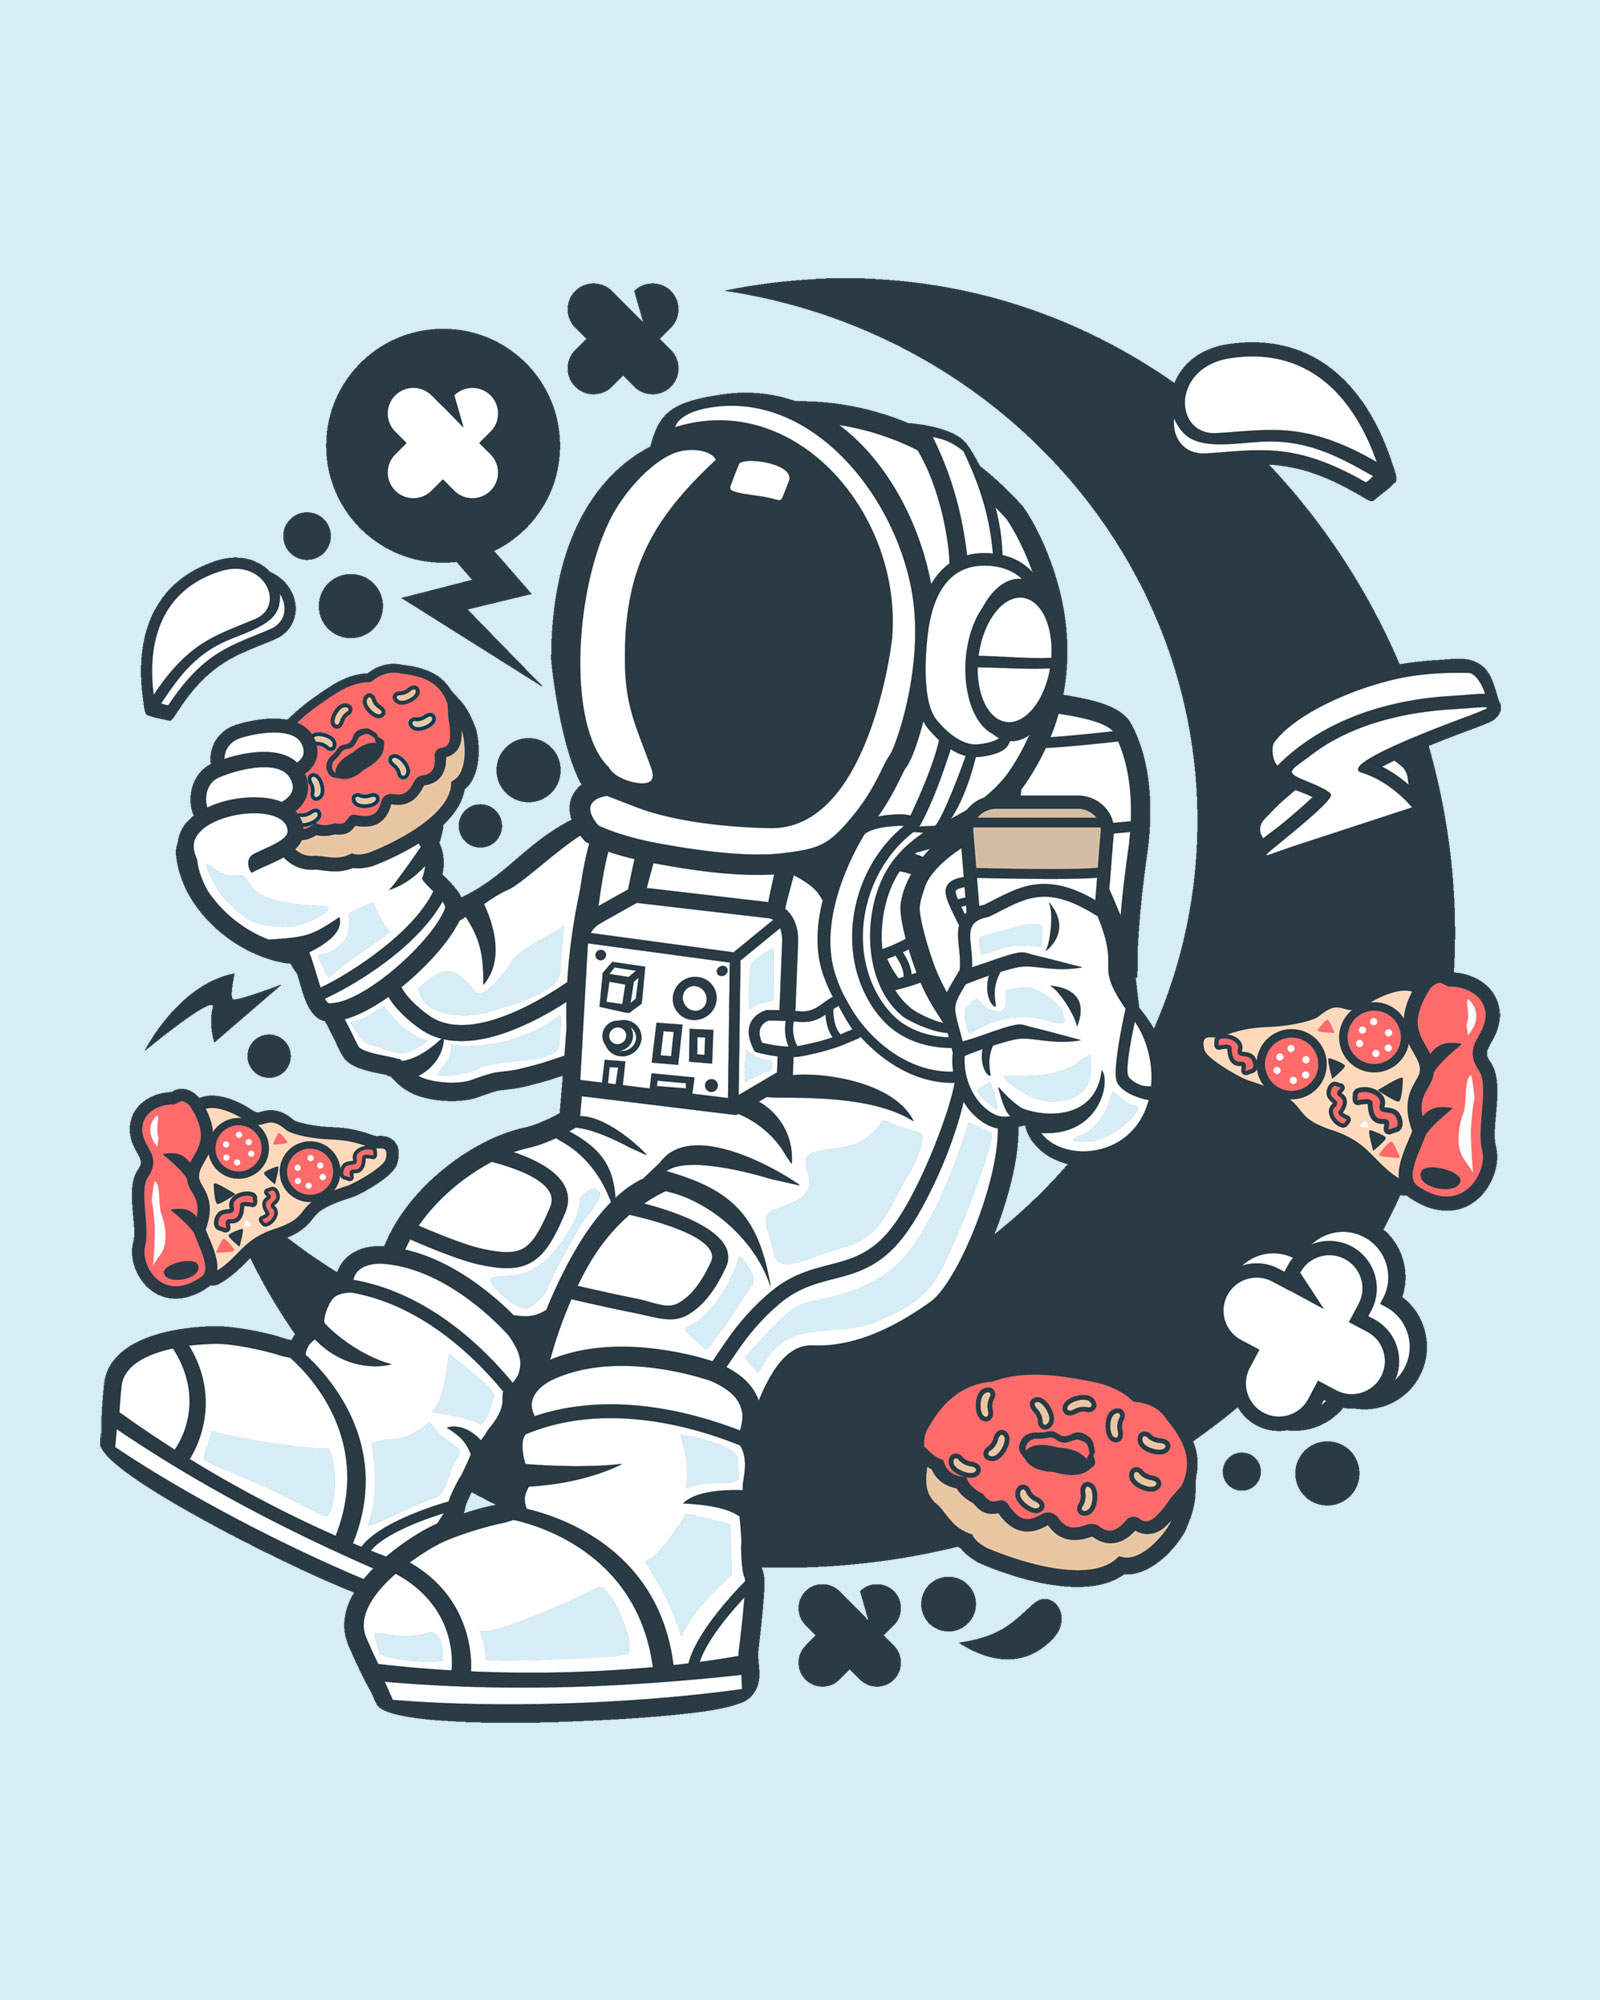 Astronaut coffee and donuts | Sky blue